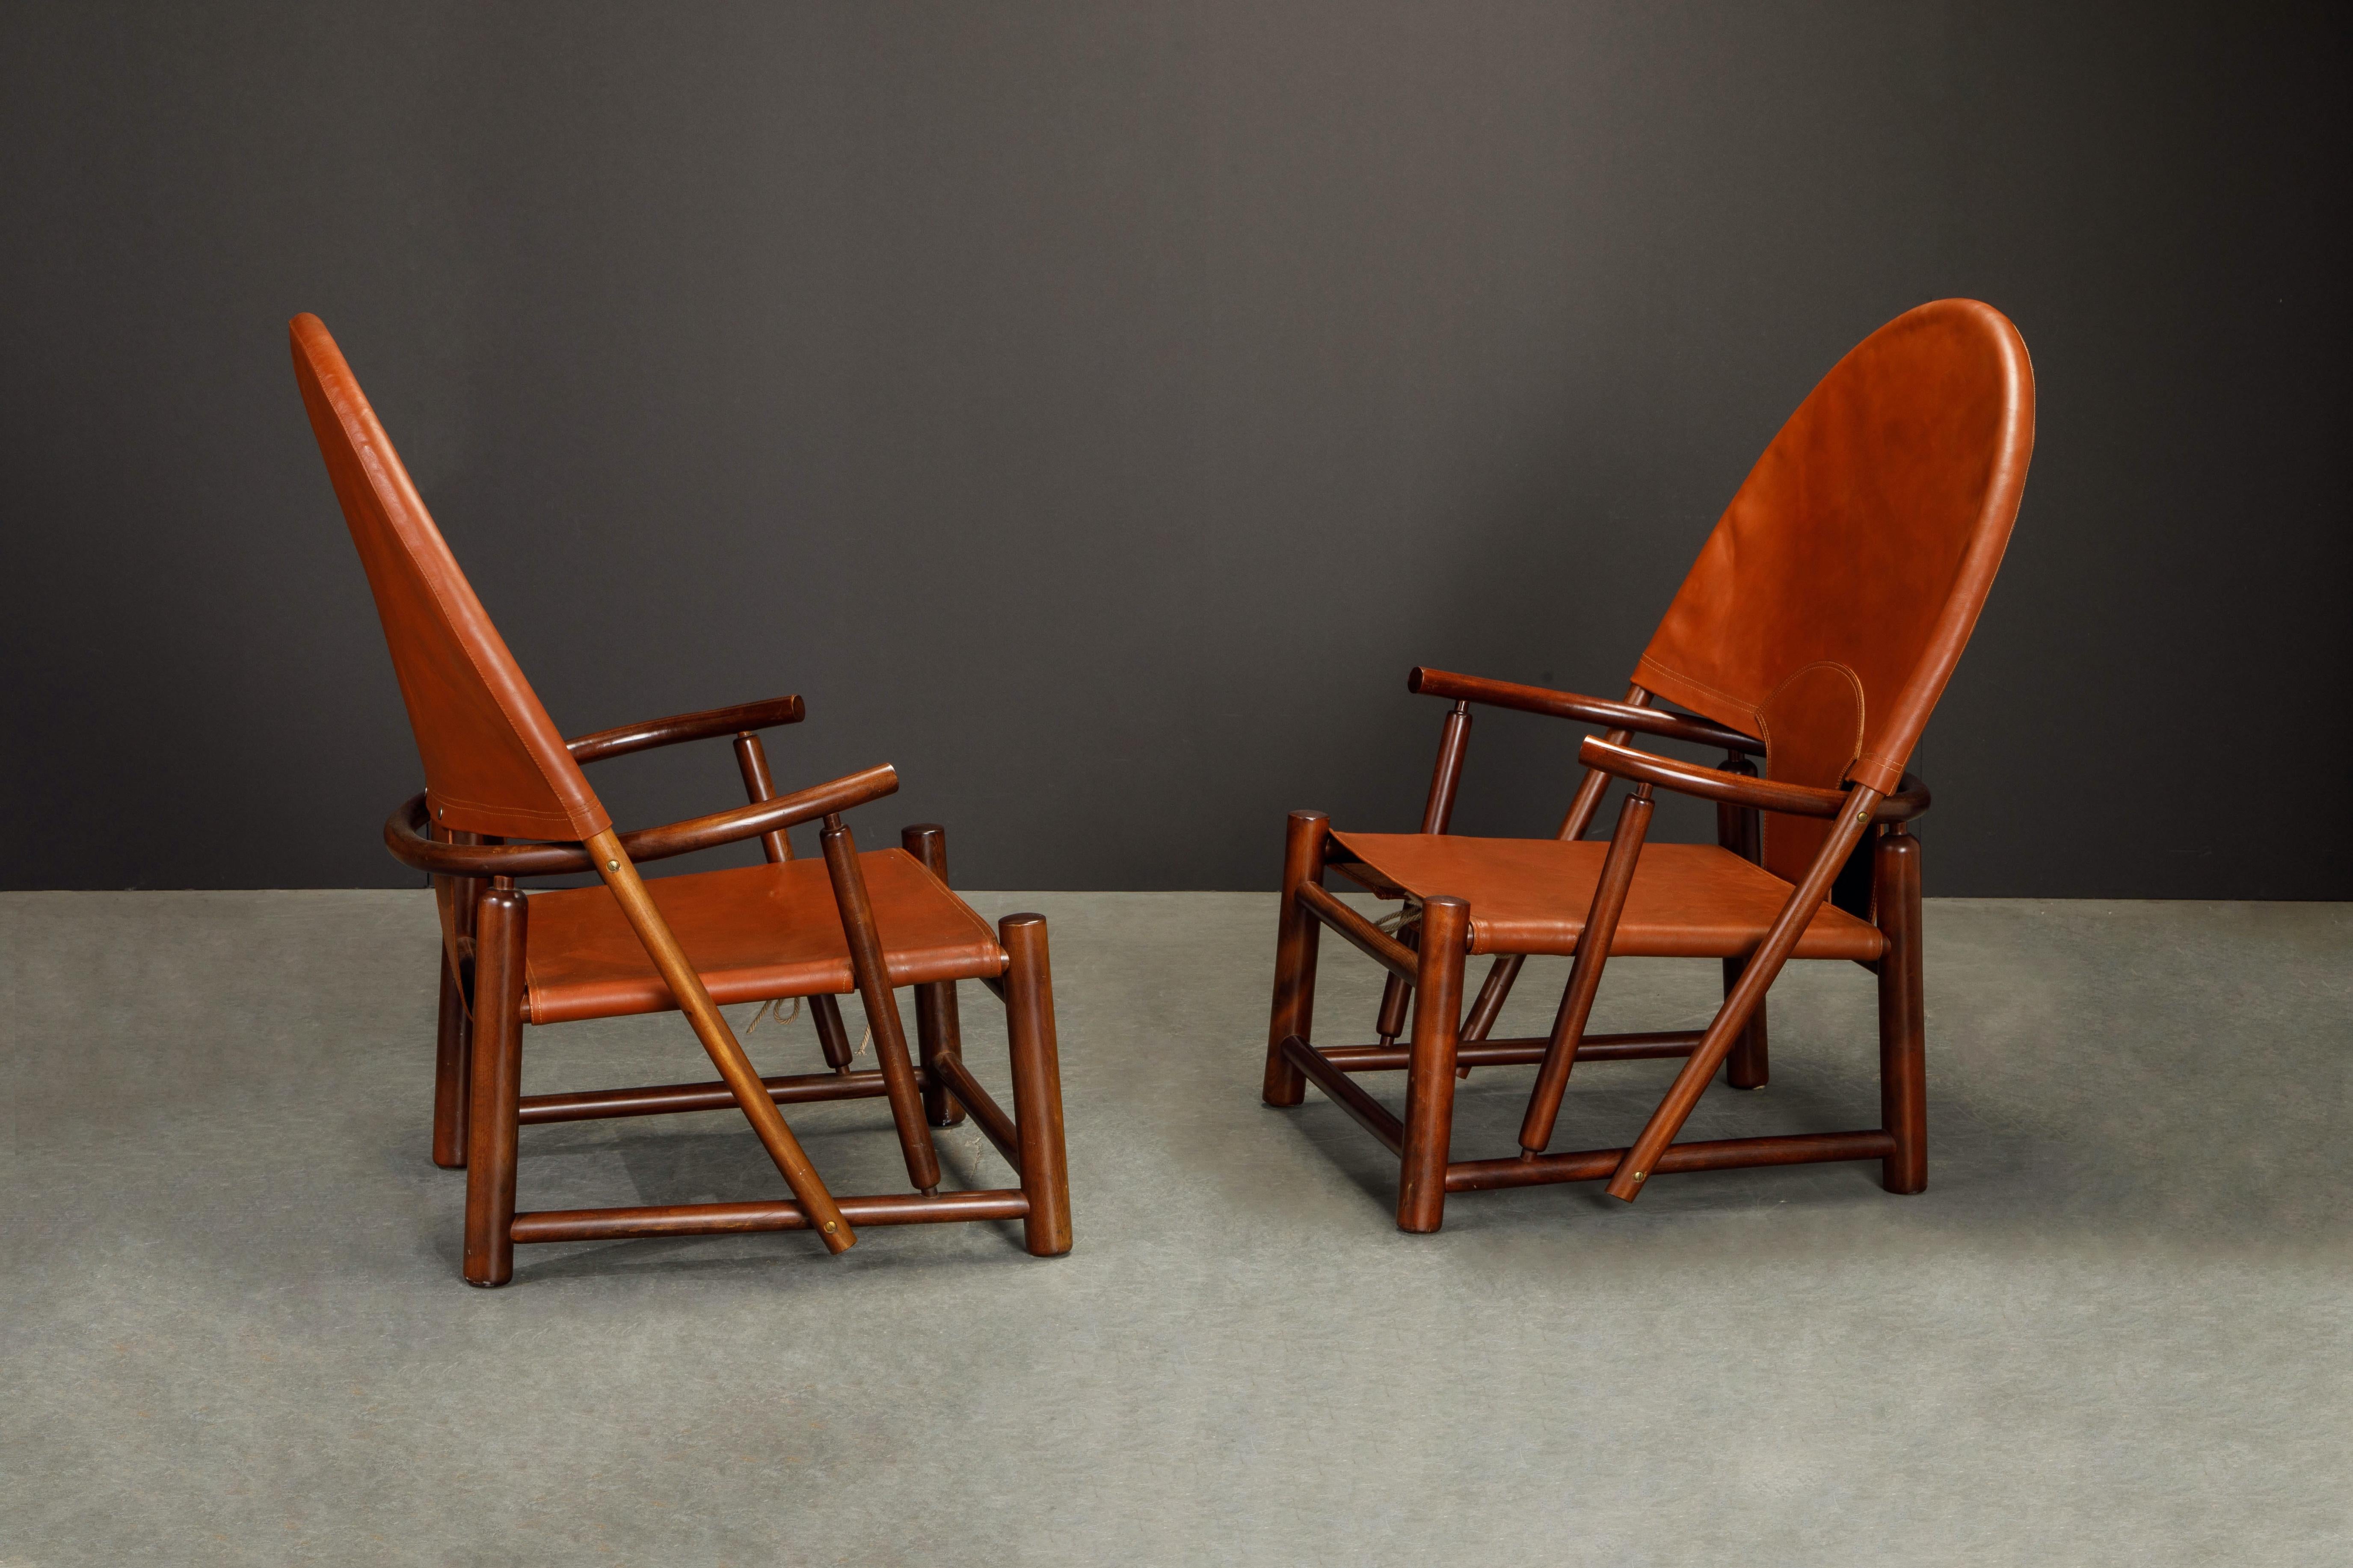 Mid-Century Modern 'Hoop' Lounge Chairs by Piero Palange & Werther Toffoloni for Germa, c. 1970